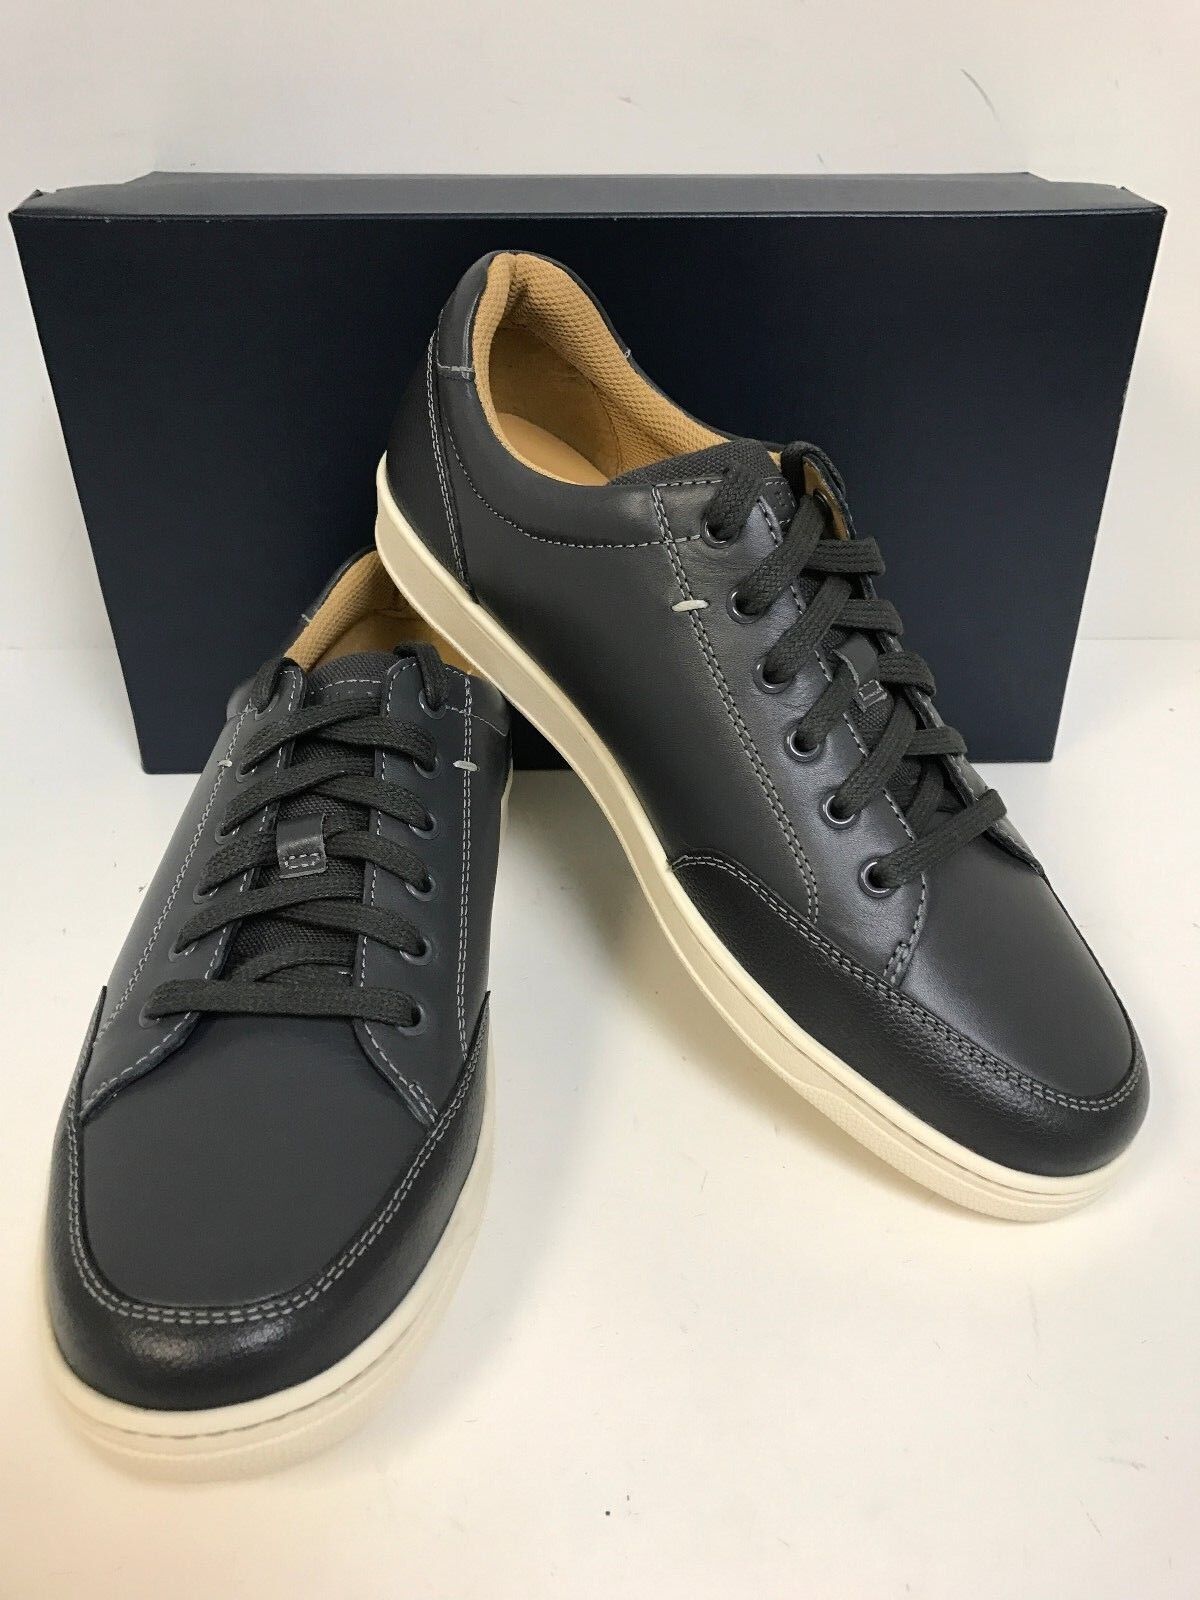 Cole Haan Menapos;s Sagan Indianapolis Mall Sneaker Laceup C26499 Limited price II Leather Grey